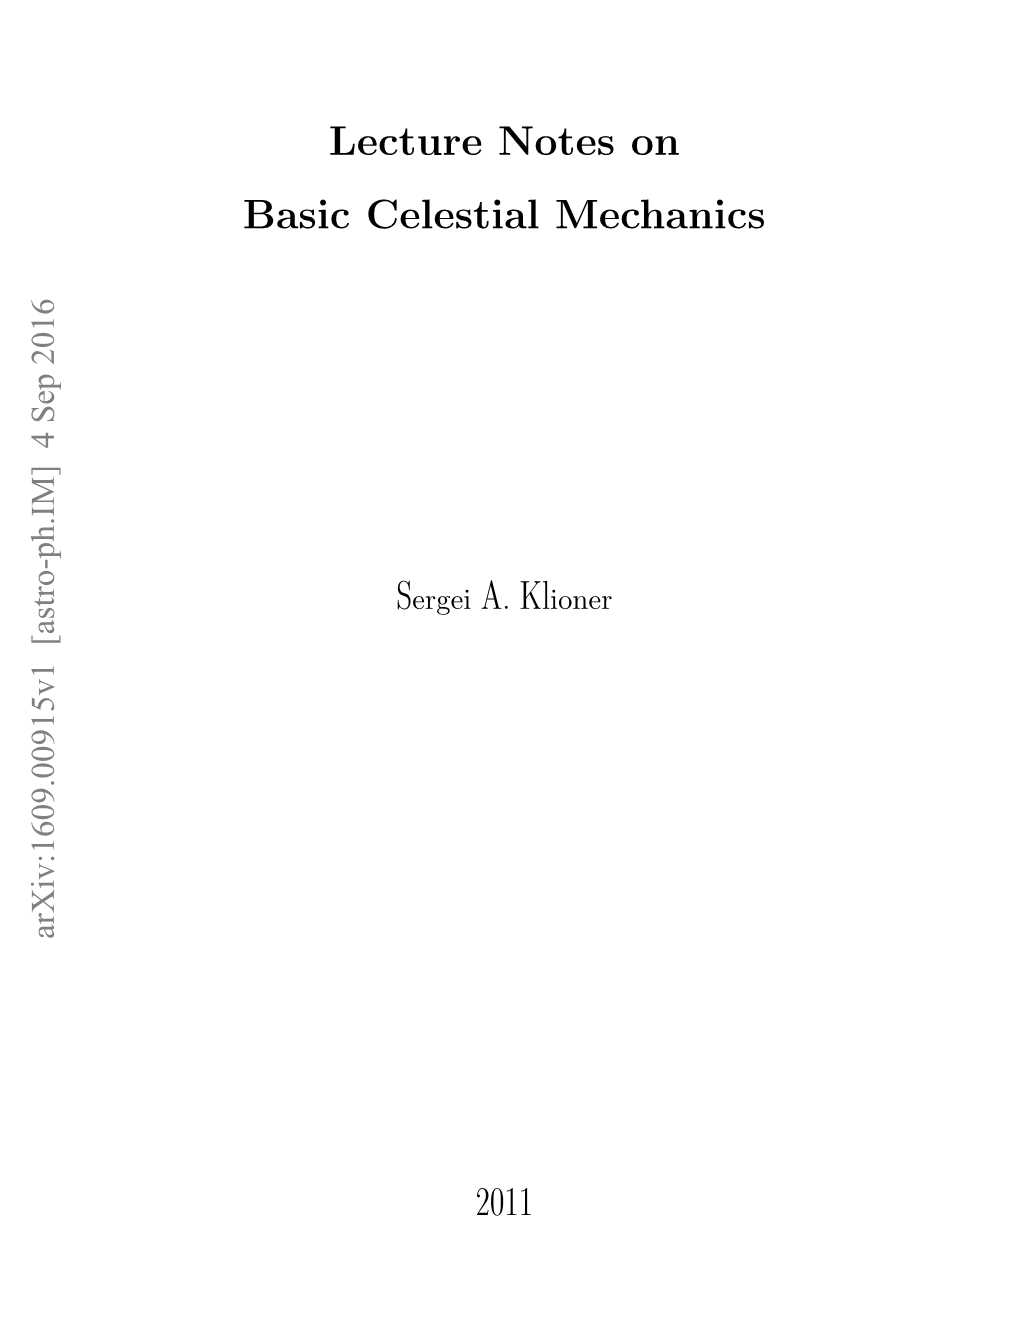 Lecture Notes on Basic Celestial Mechanics